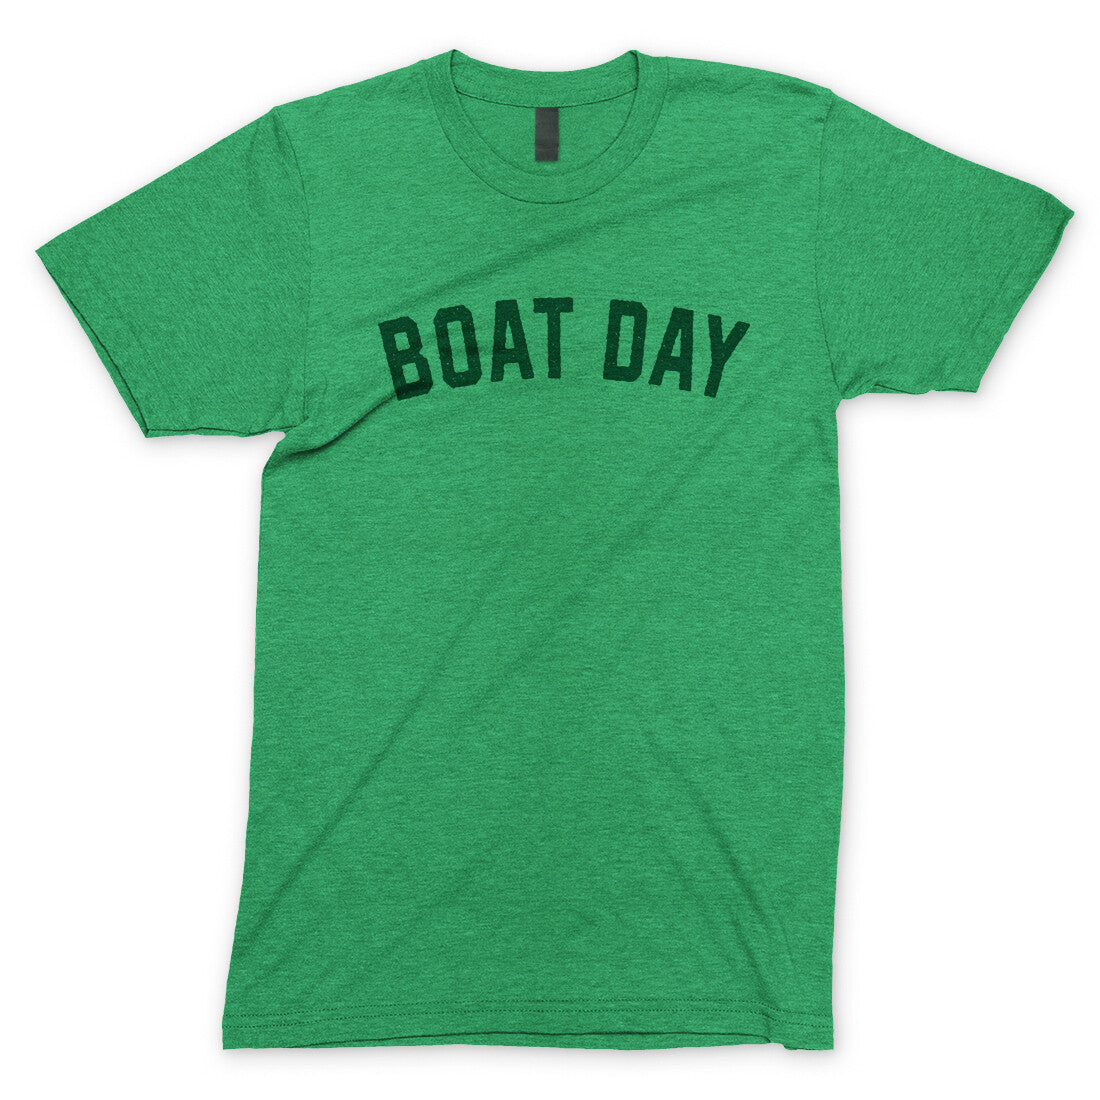 Boat Day in Heather Irish Green Color